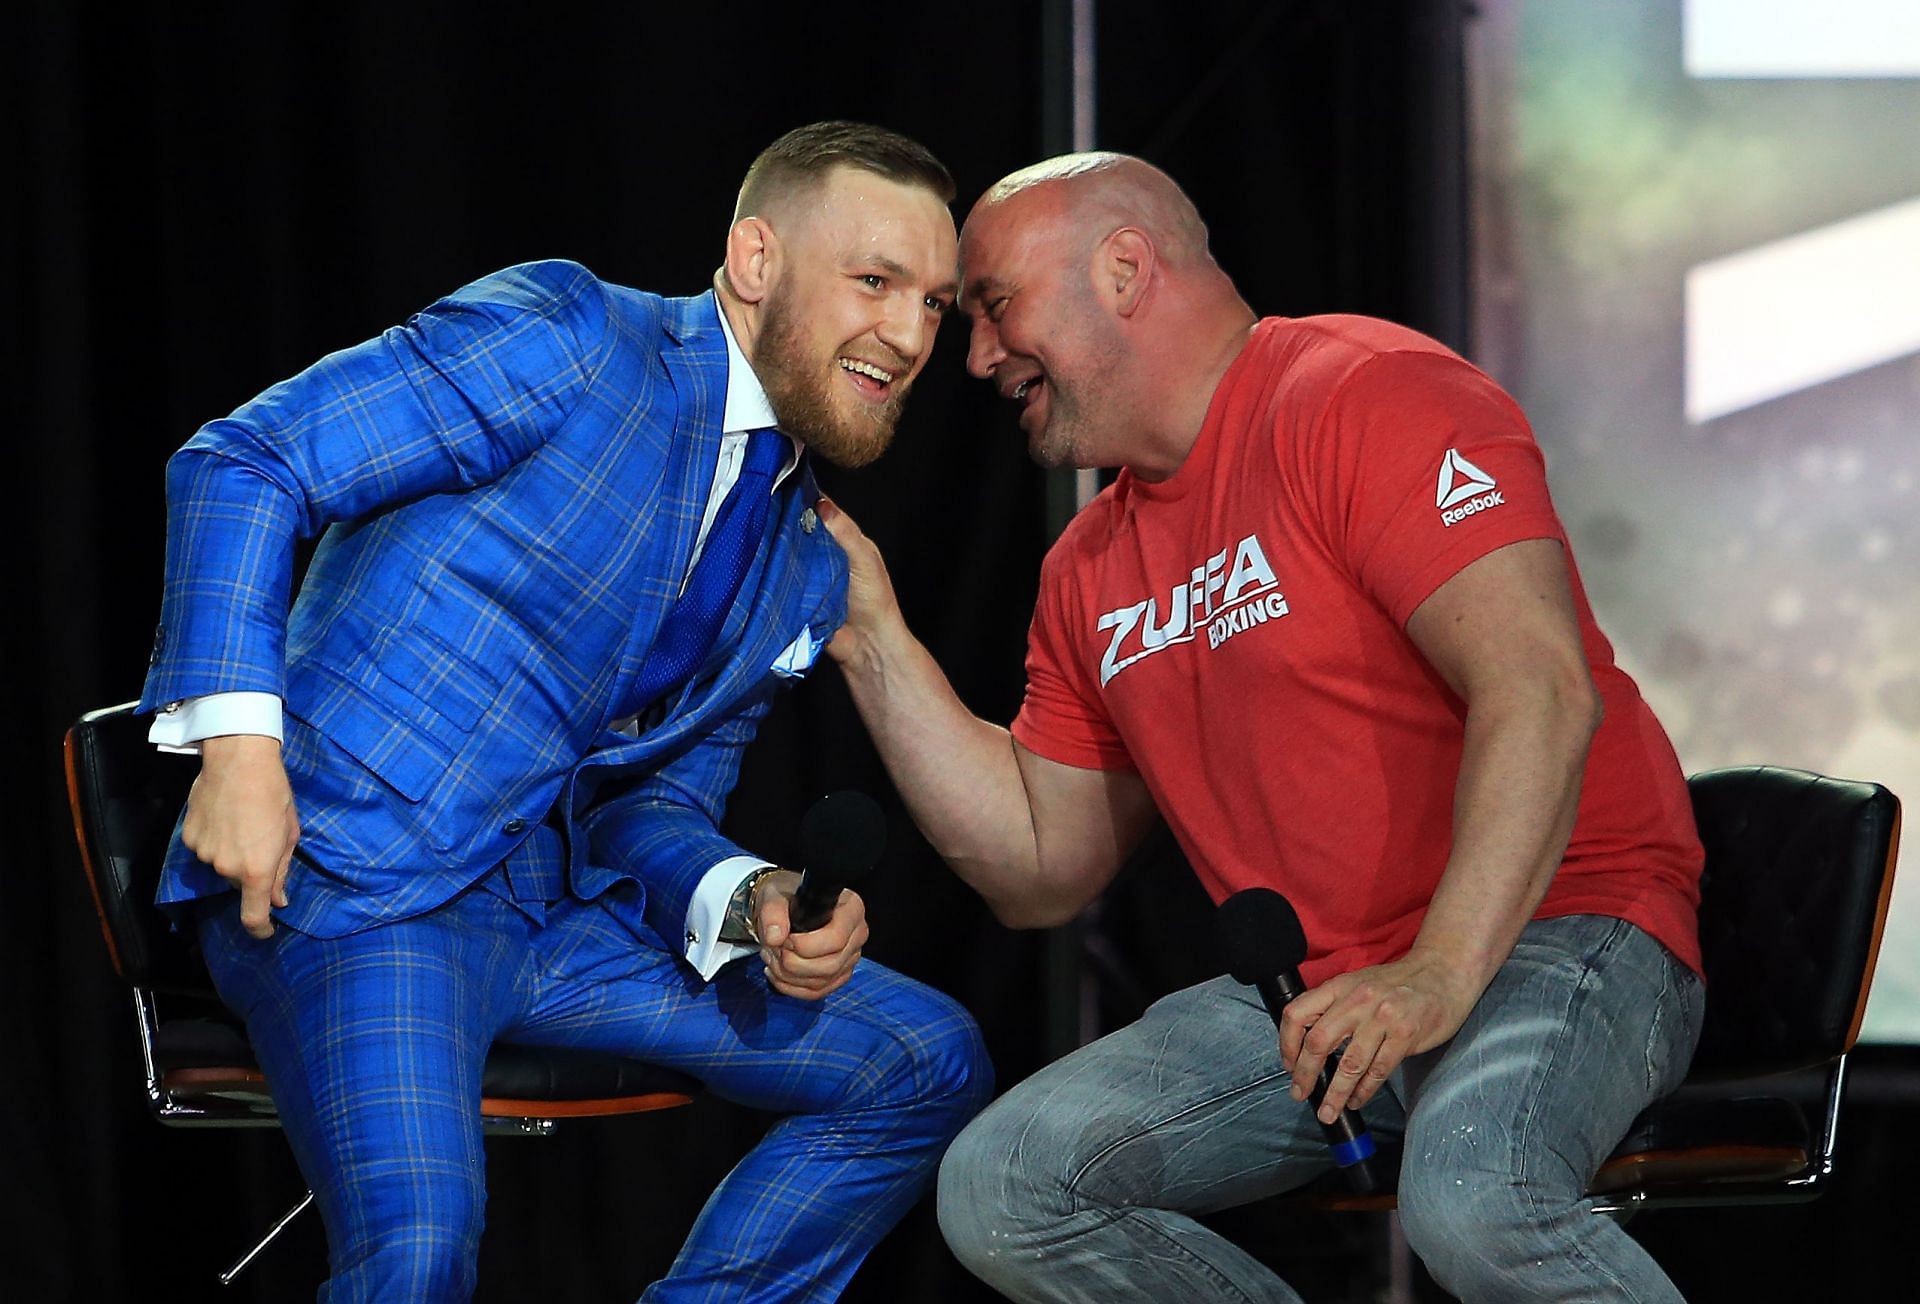 Conor McGregor has stated that he wants to remain with the UFC for life